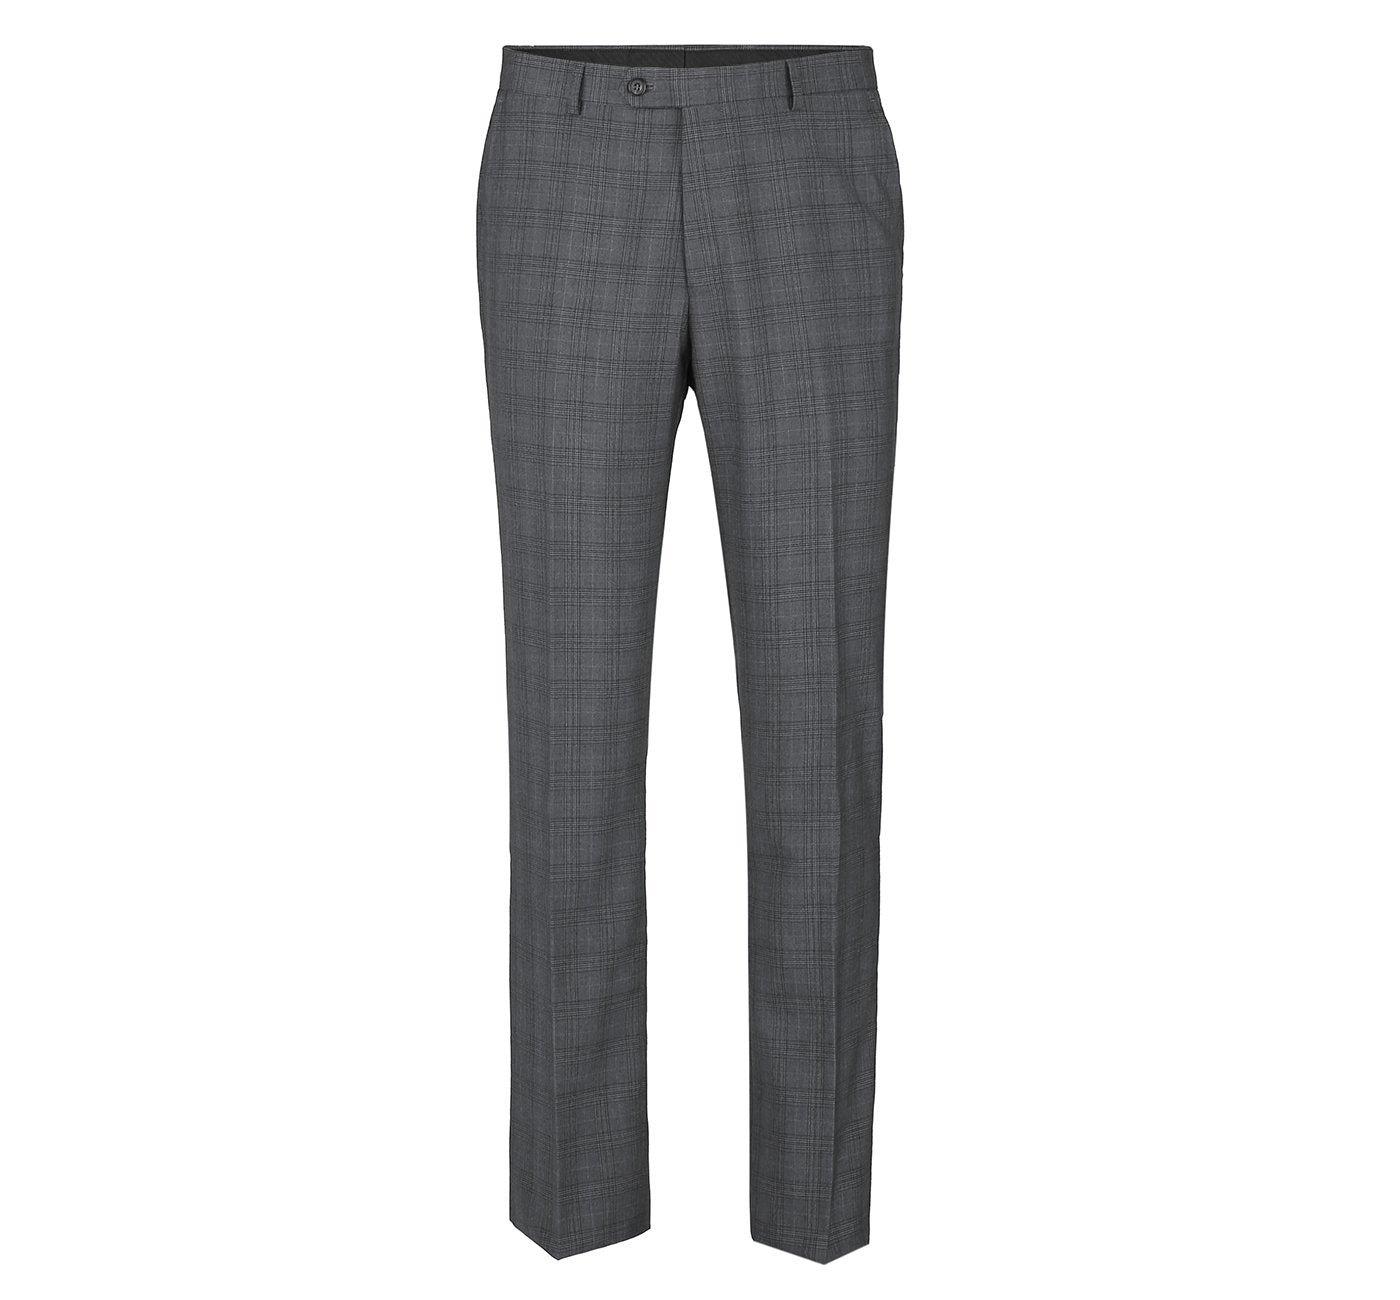 278-1 Men's 3-Piece Classic Fit Single Breasted Grey Windowpane Suit